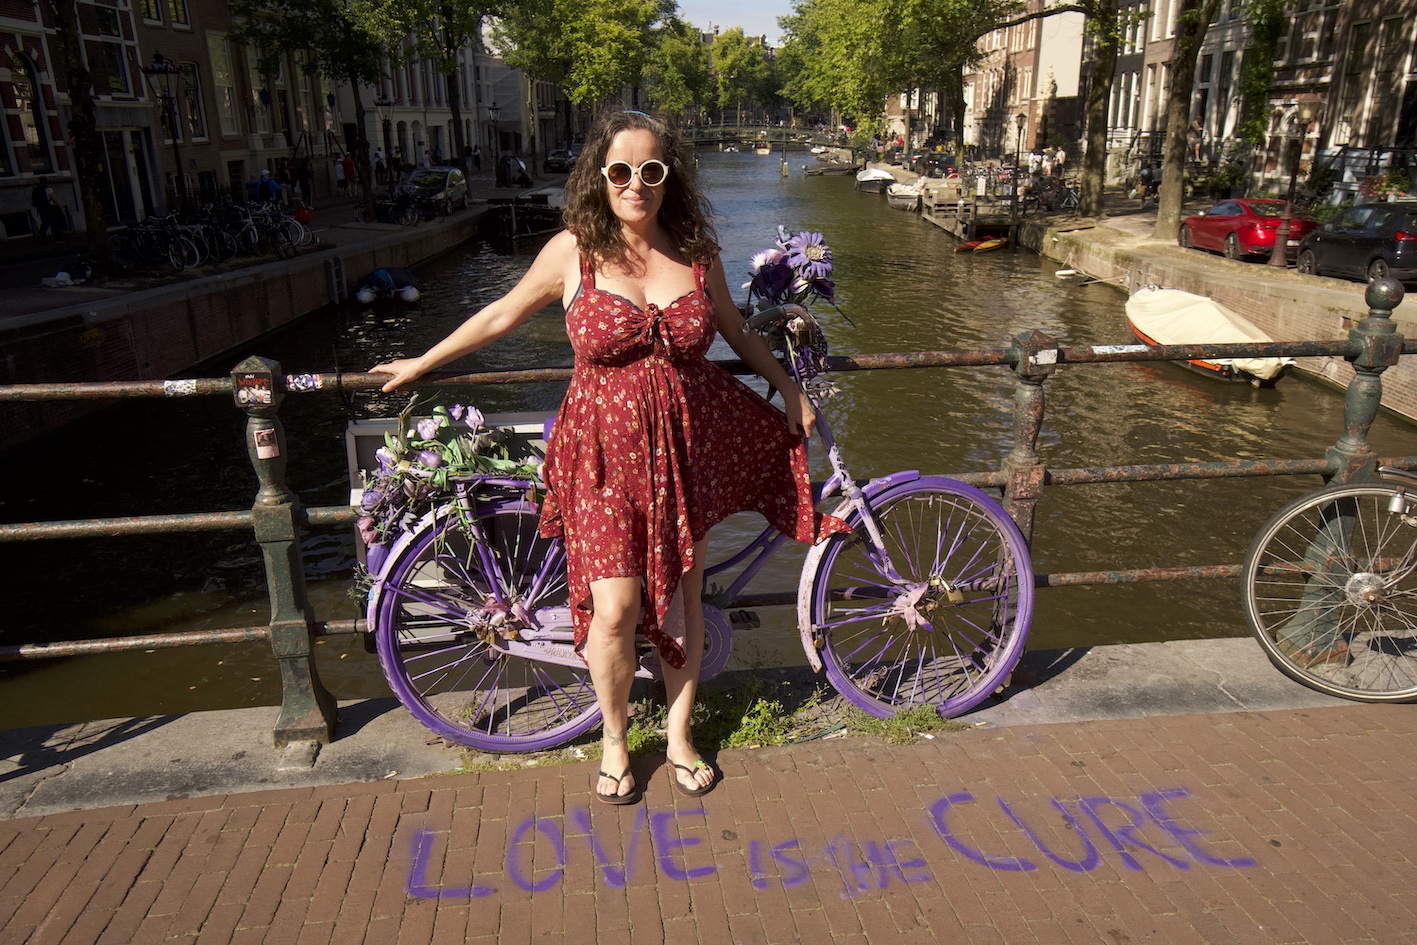 Pilar with a nice decorated bike in the Amsterdam canals